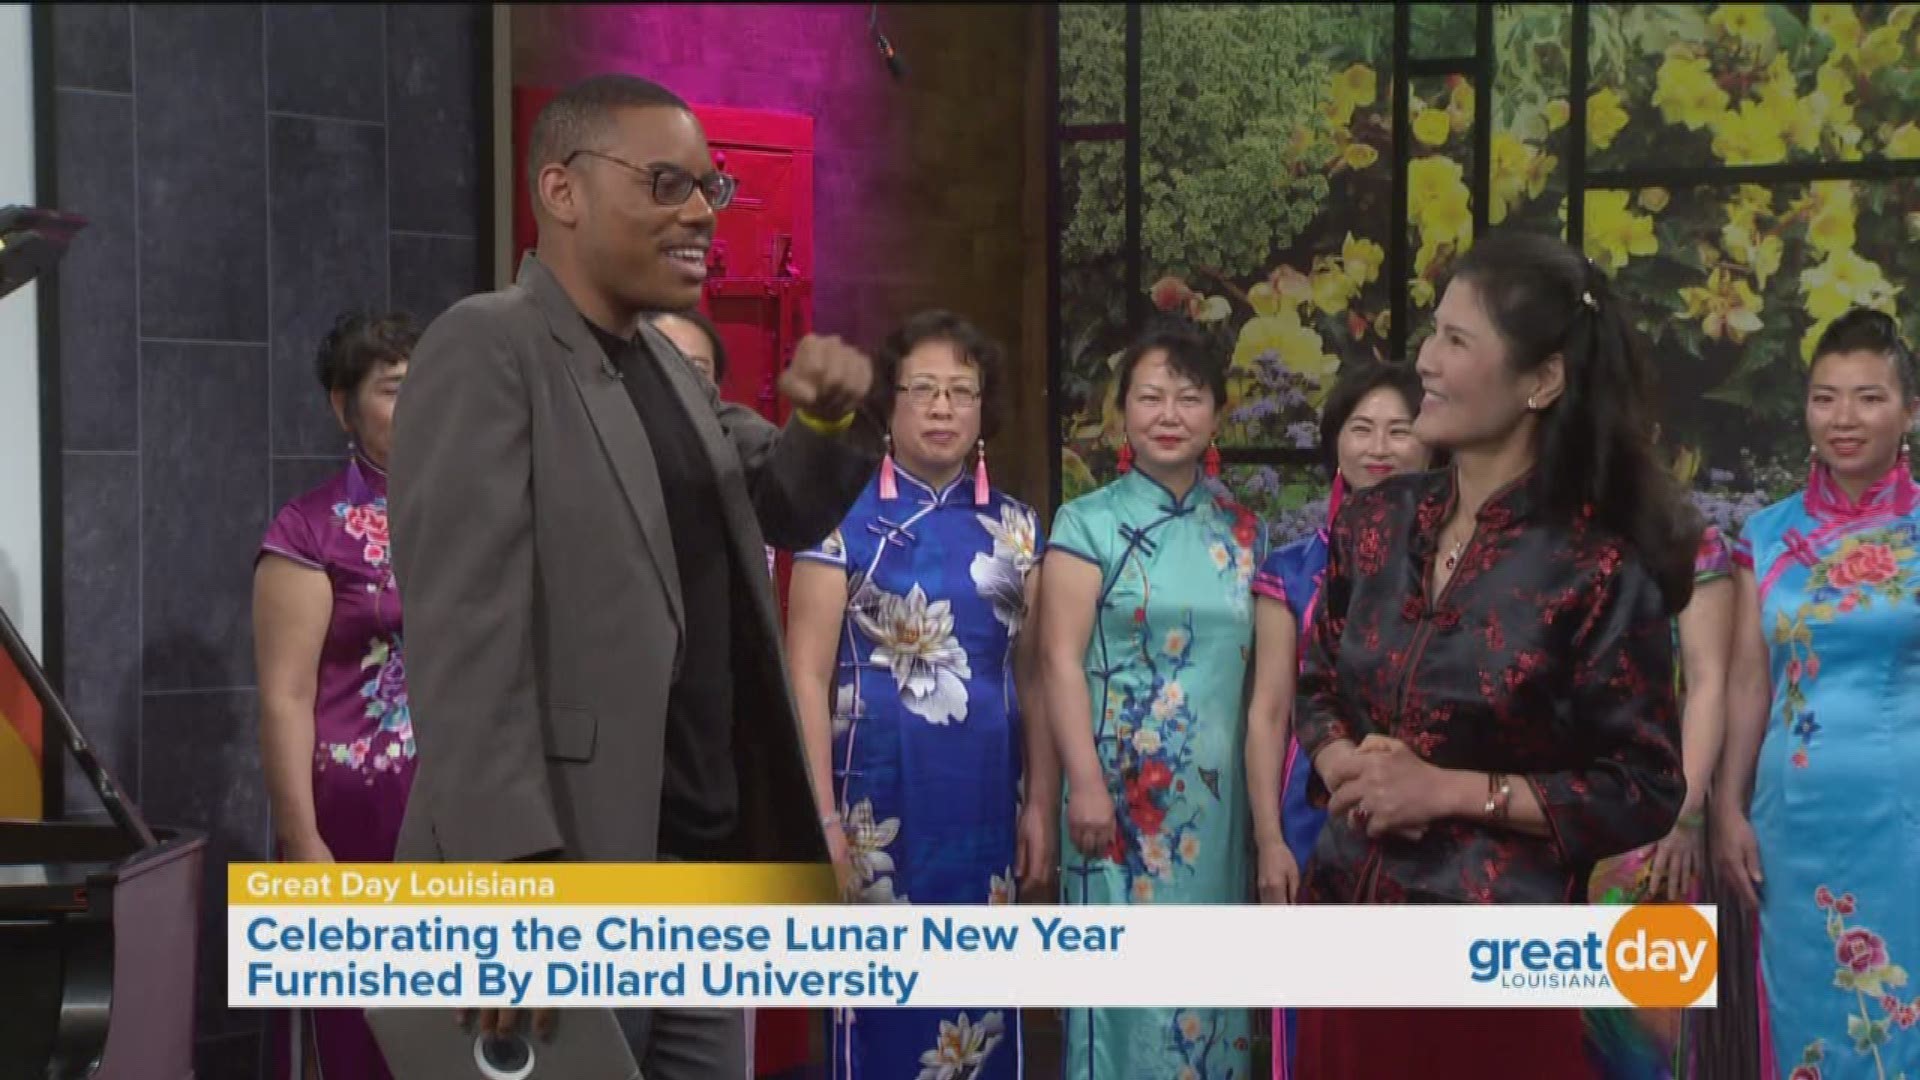 Dr, Wen Zhang of Dillard University discussed the Chinese Lunar New Year and performed with an all-female Chinese ensemble.